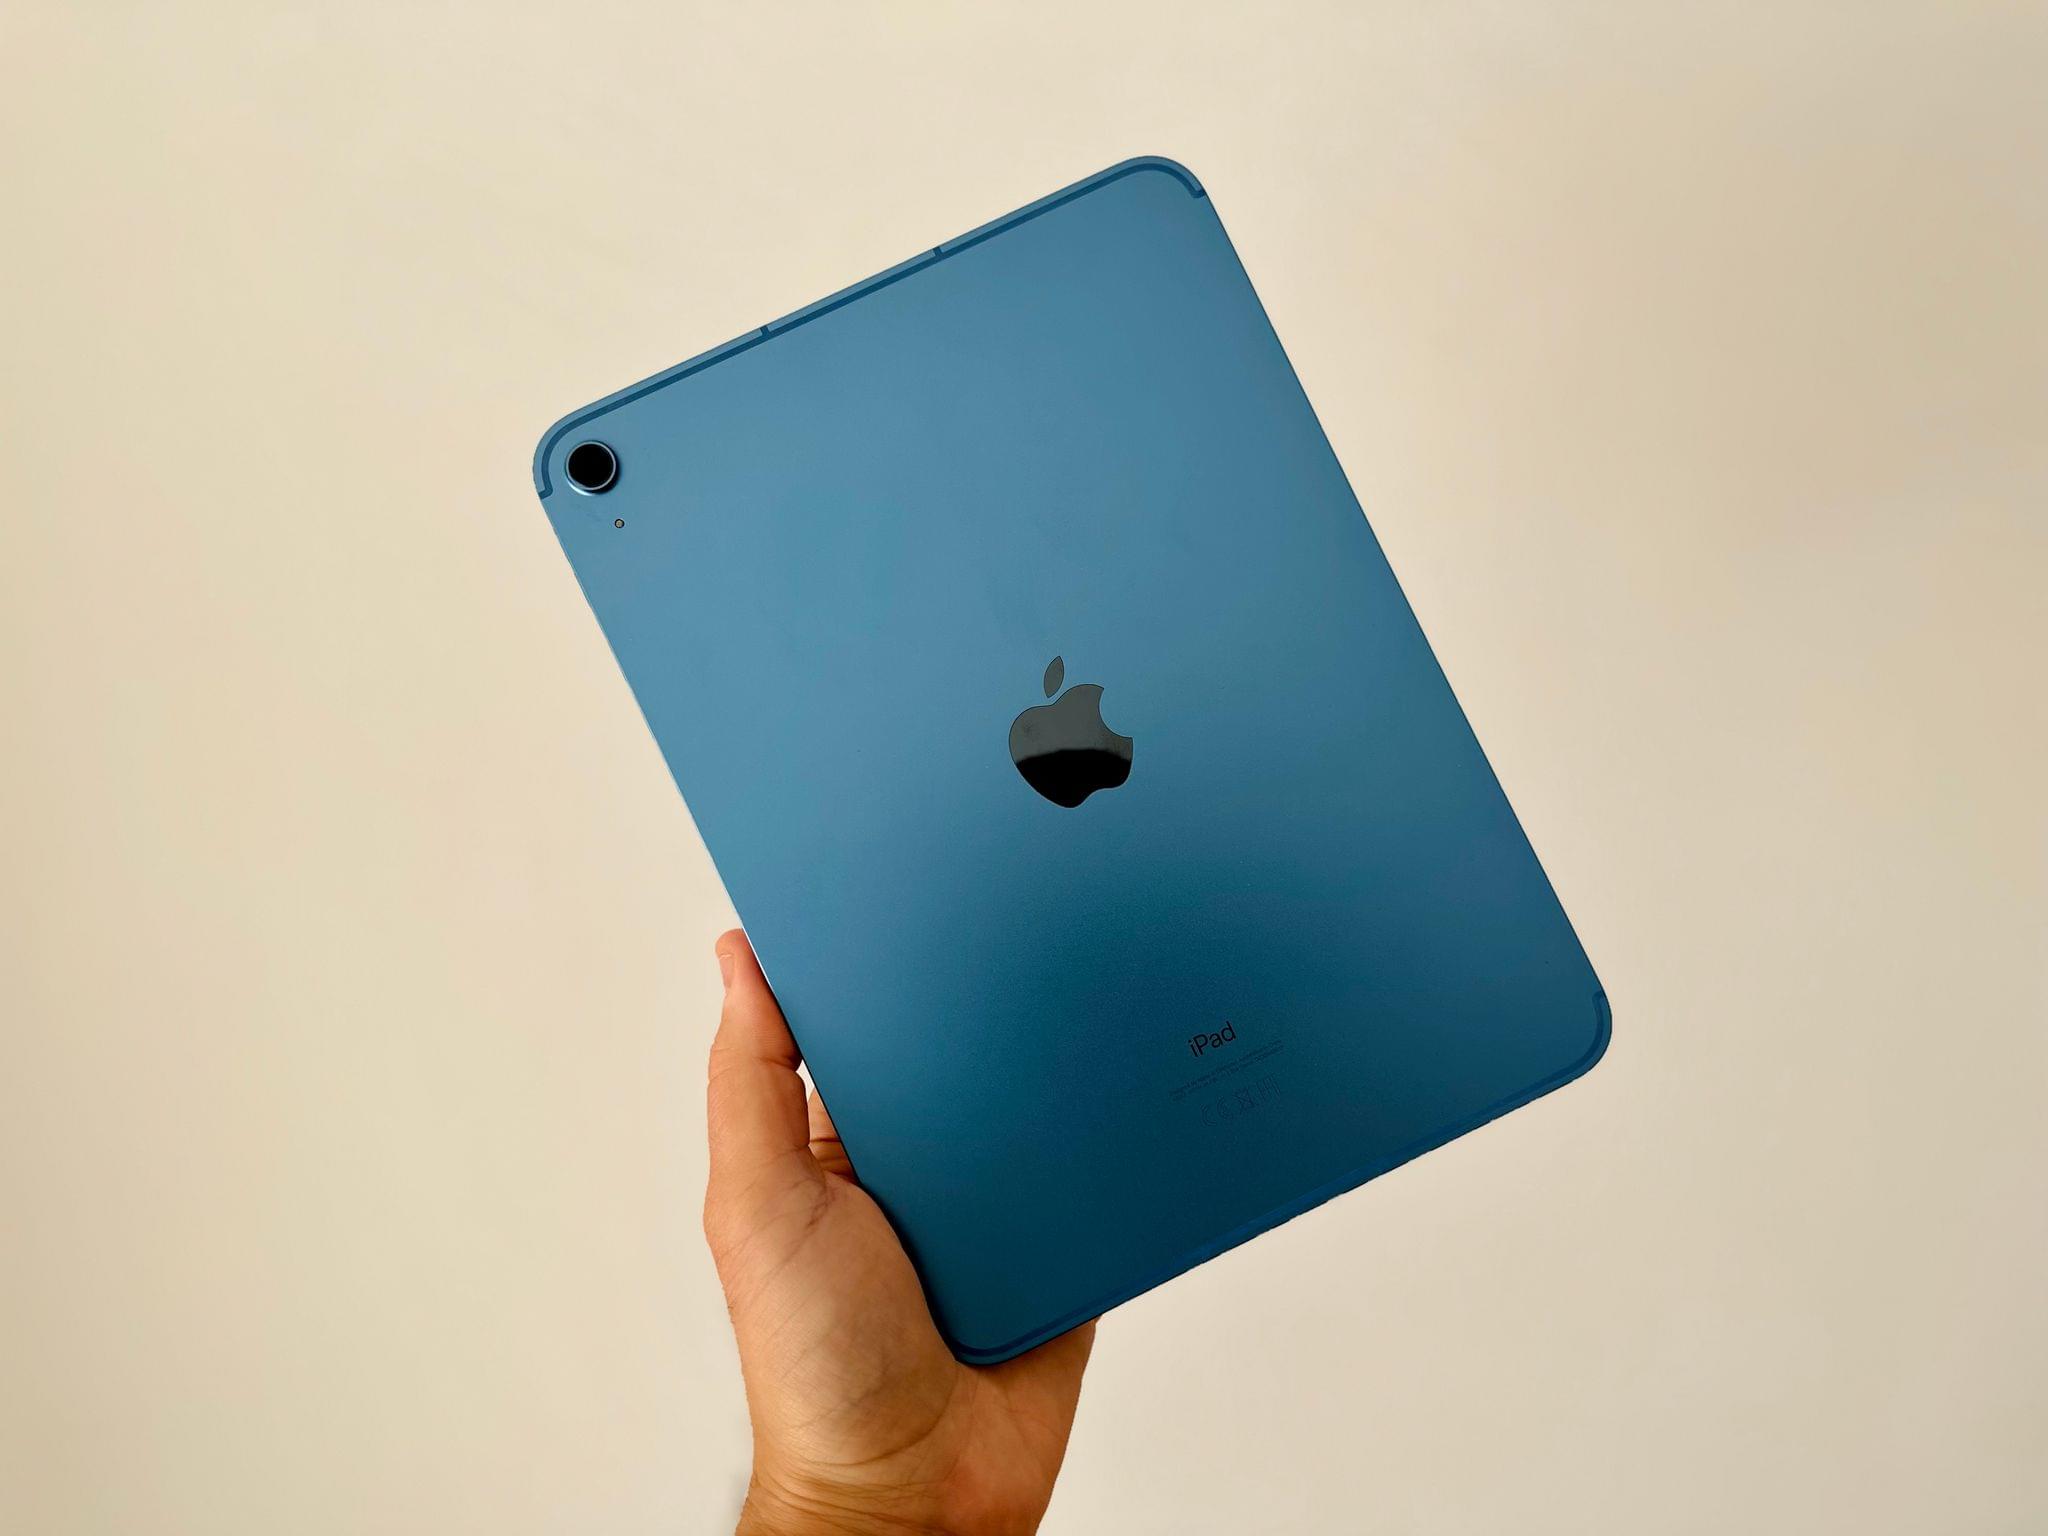 A note about colors: as you can see, the blue iPad Apple sent me has an actual, fun blue color that looks unmistakably blue, unlike the iPad Air's blueish-but-sometimes-gray hue. I like that Apple is using real colors in this iPad generation; I'd like this to become a trend even in other iPad models. Why can't iPad Air and iPad Pro owners have fun colors too?